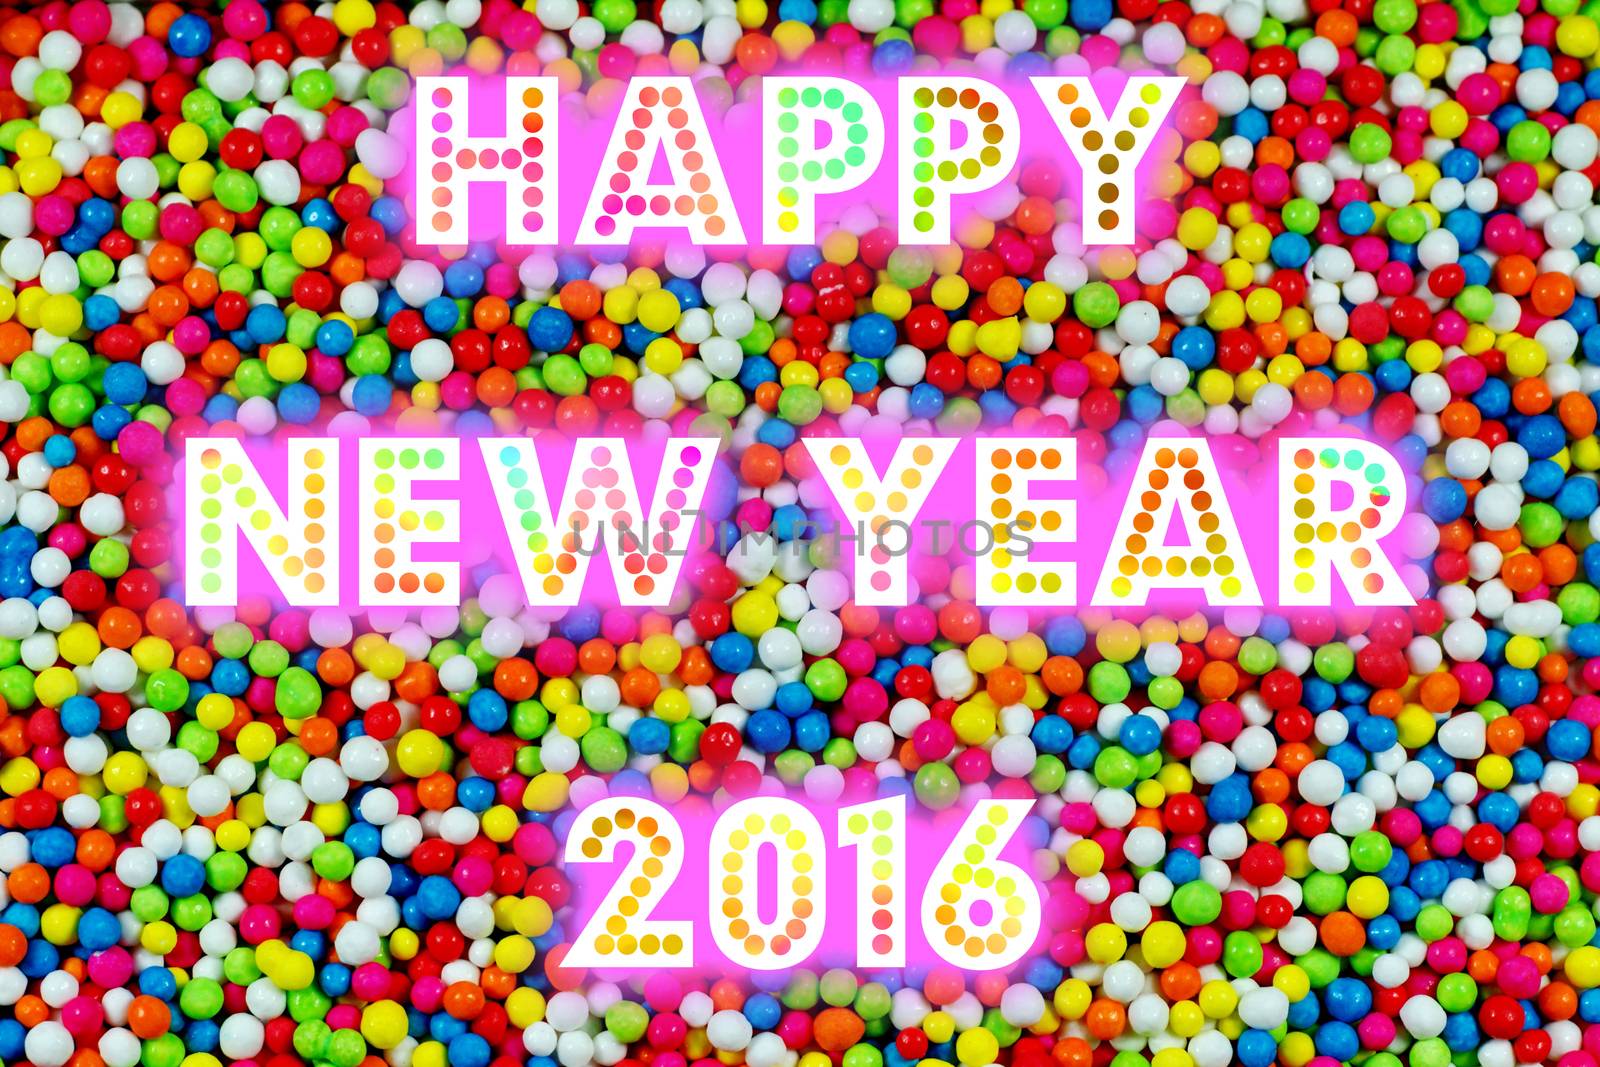 HAPPY NEW YEAR 2016 word with colorful decoration